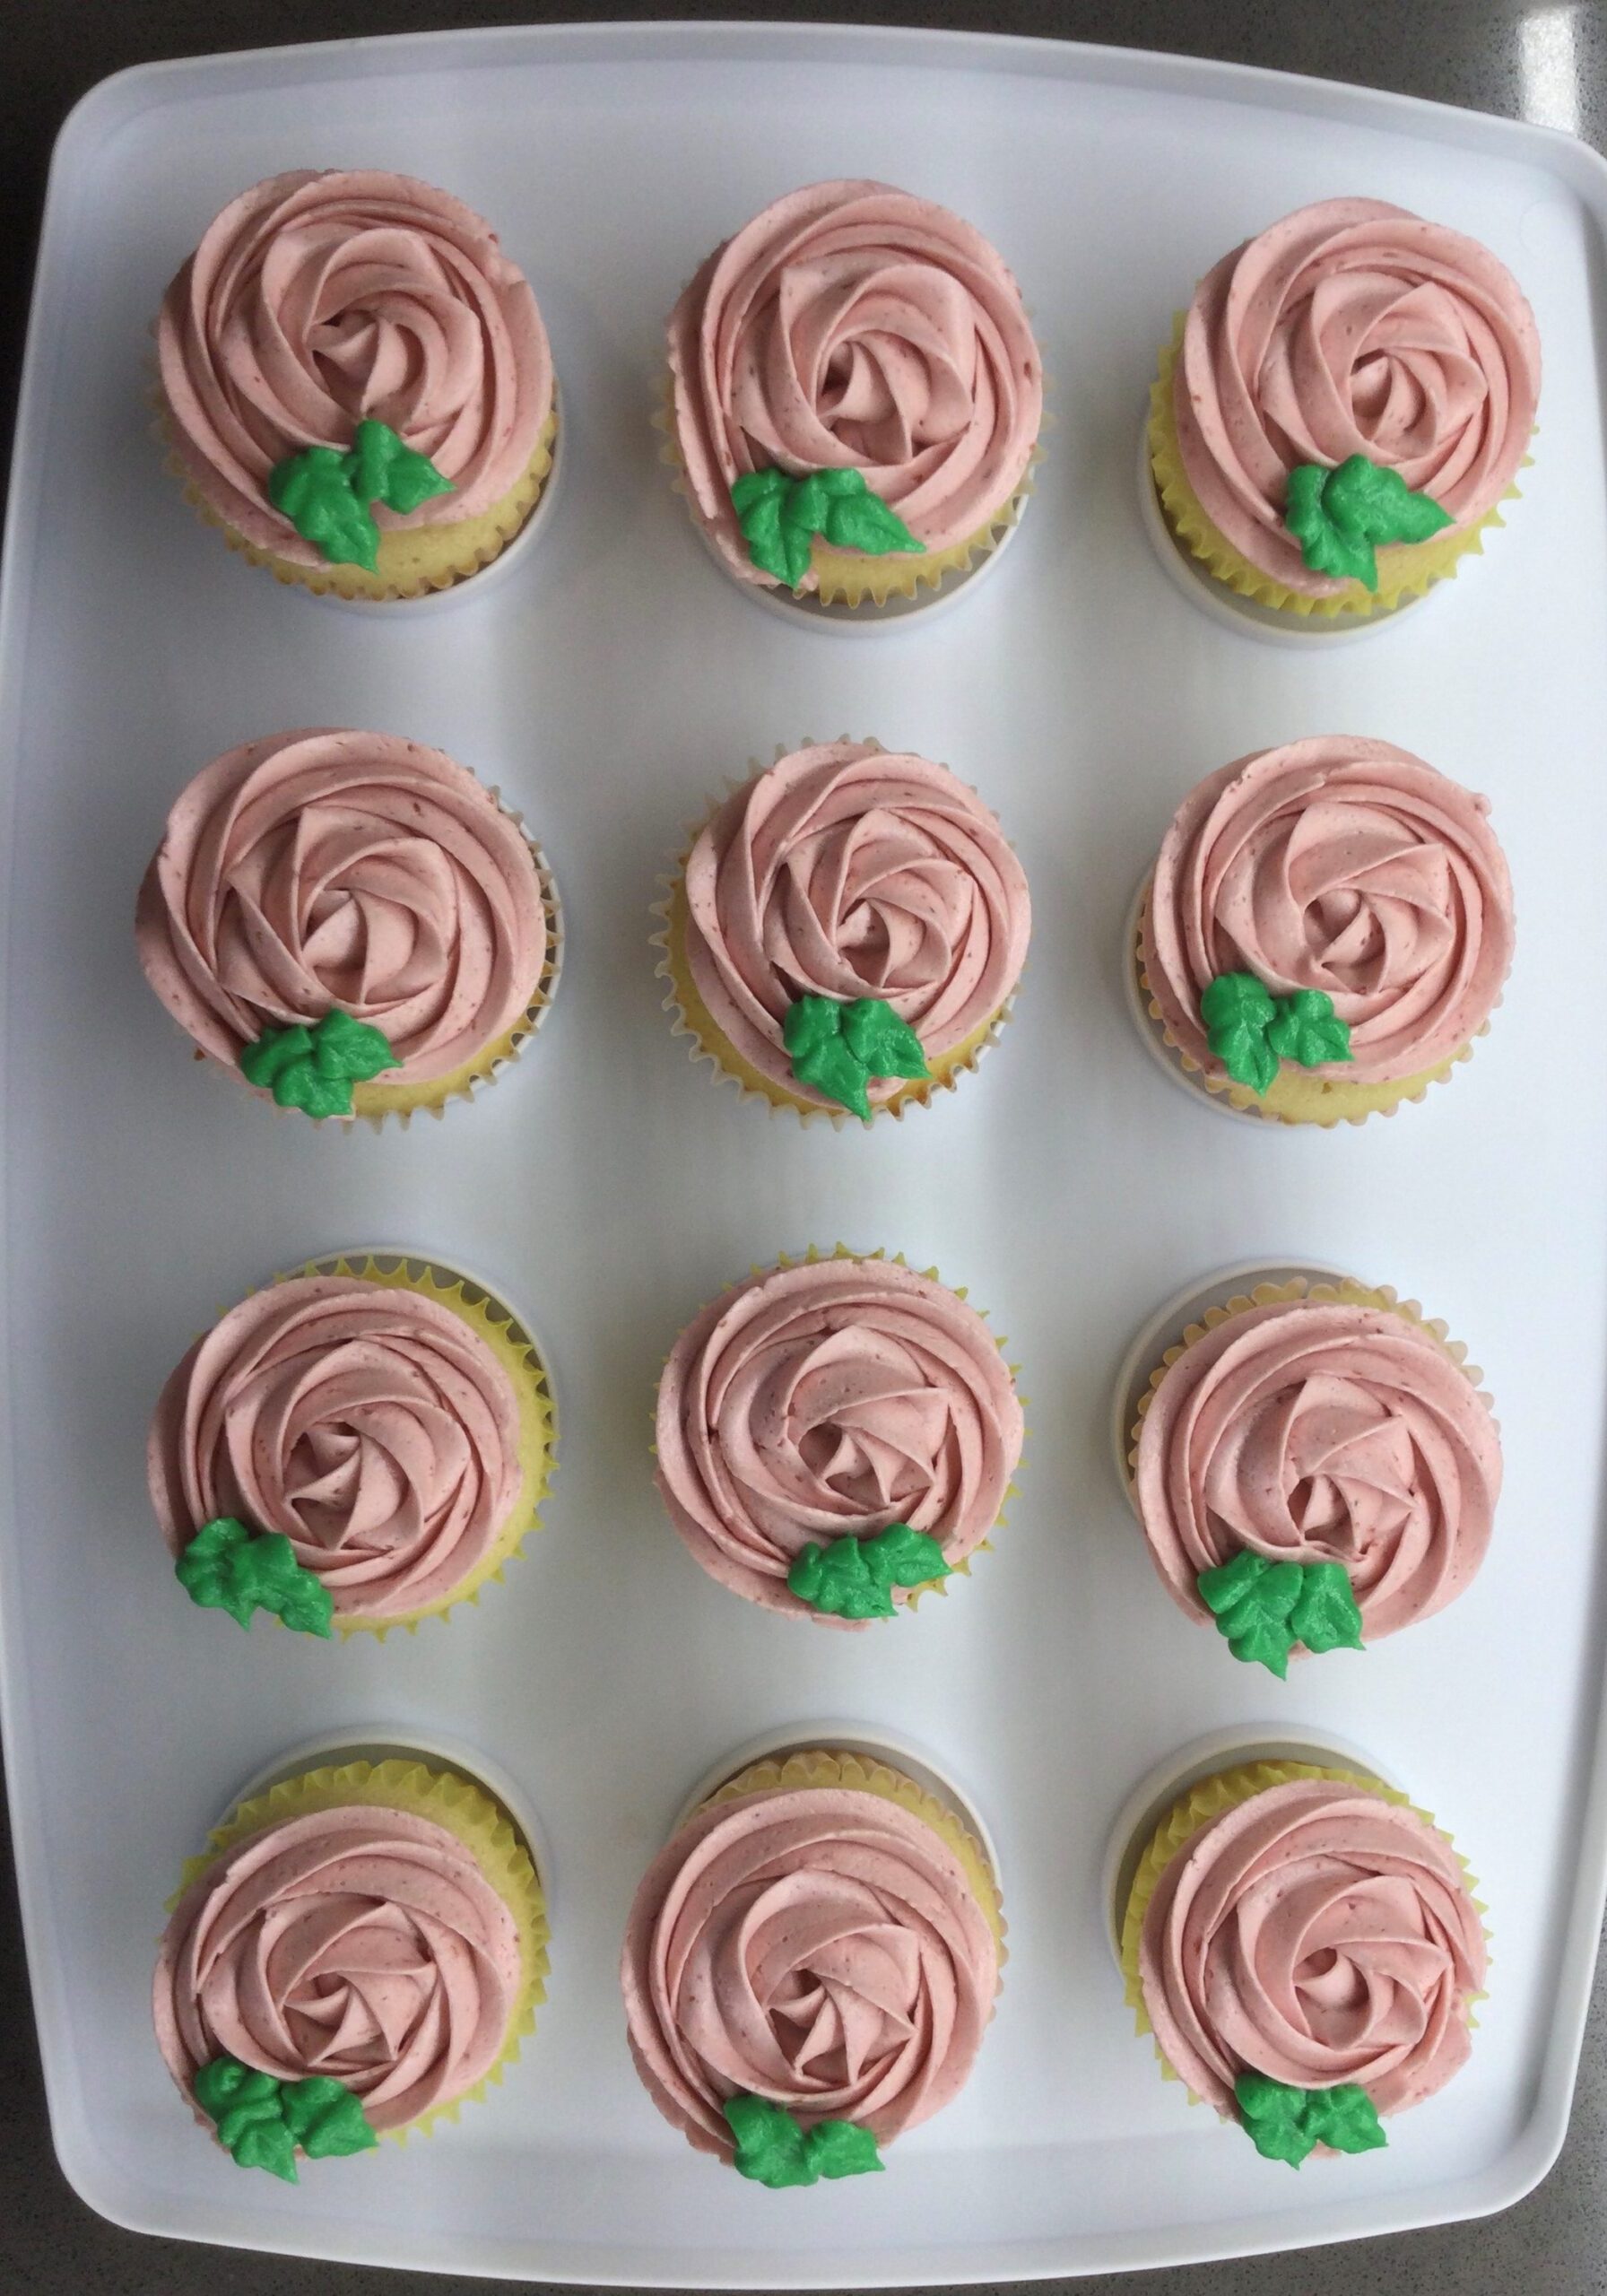 Rosette Cupcakes (Corinne's bday 2021) Top View (2)